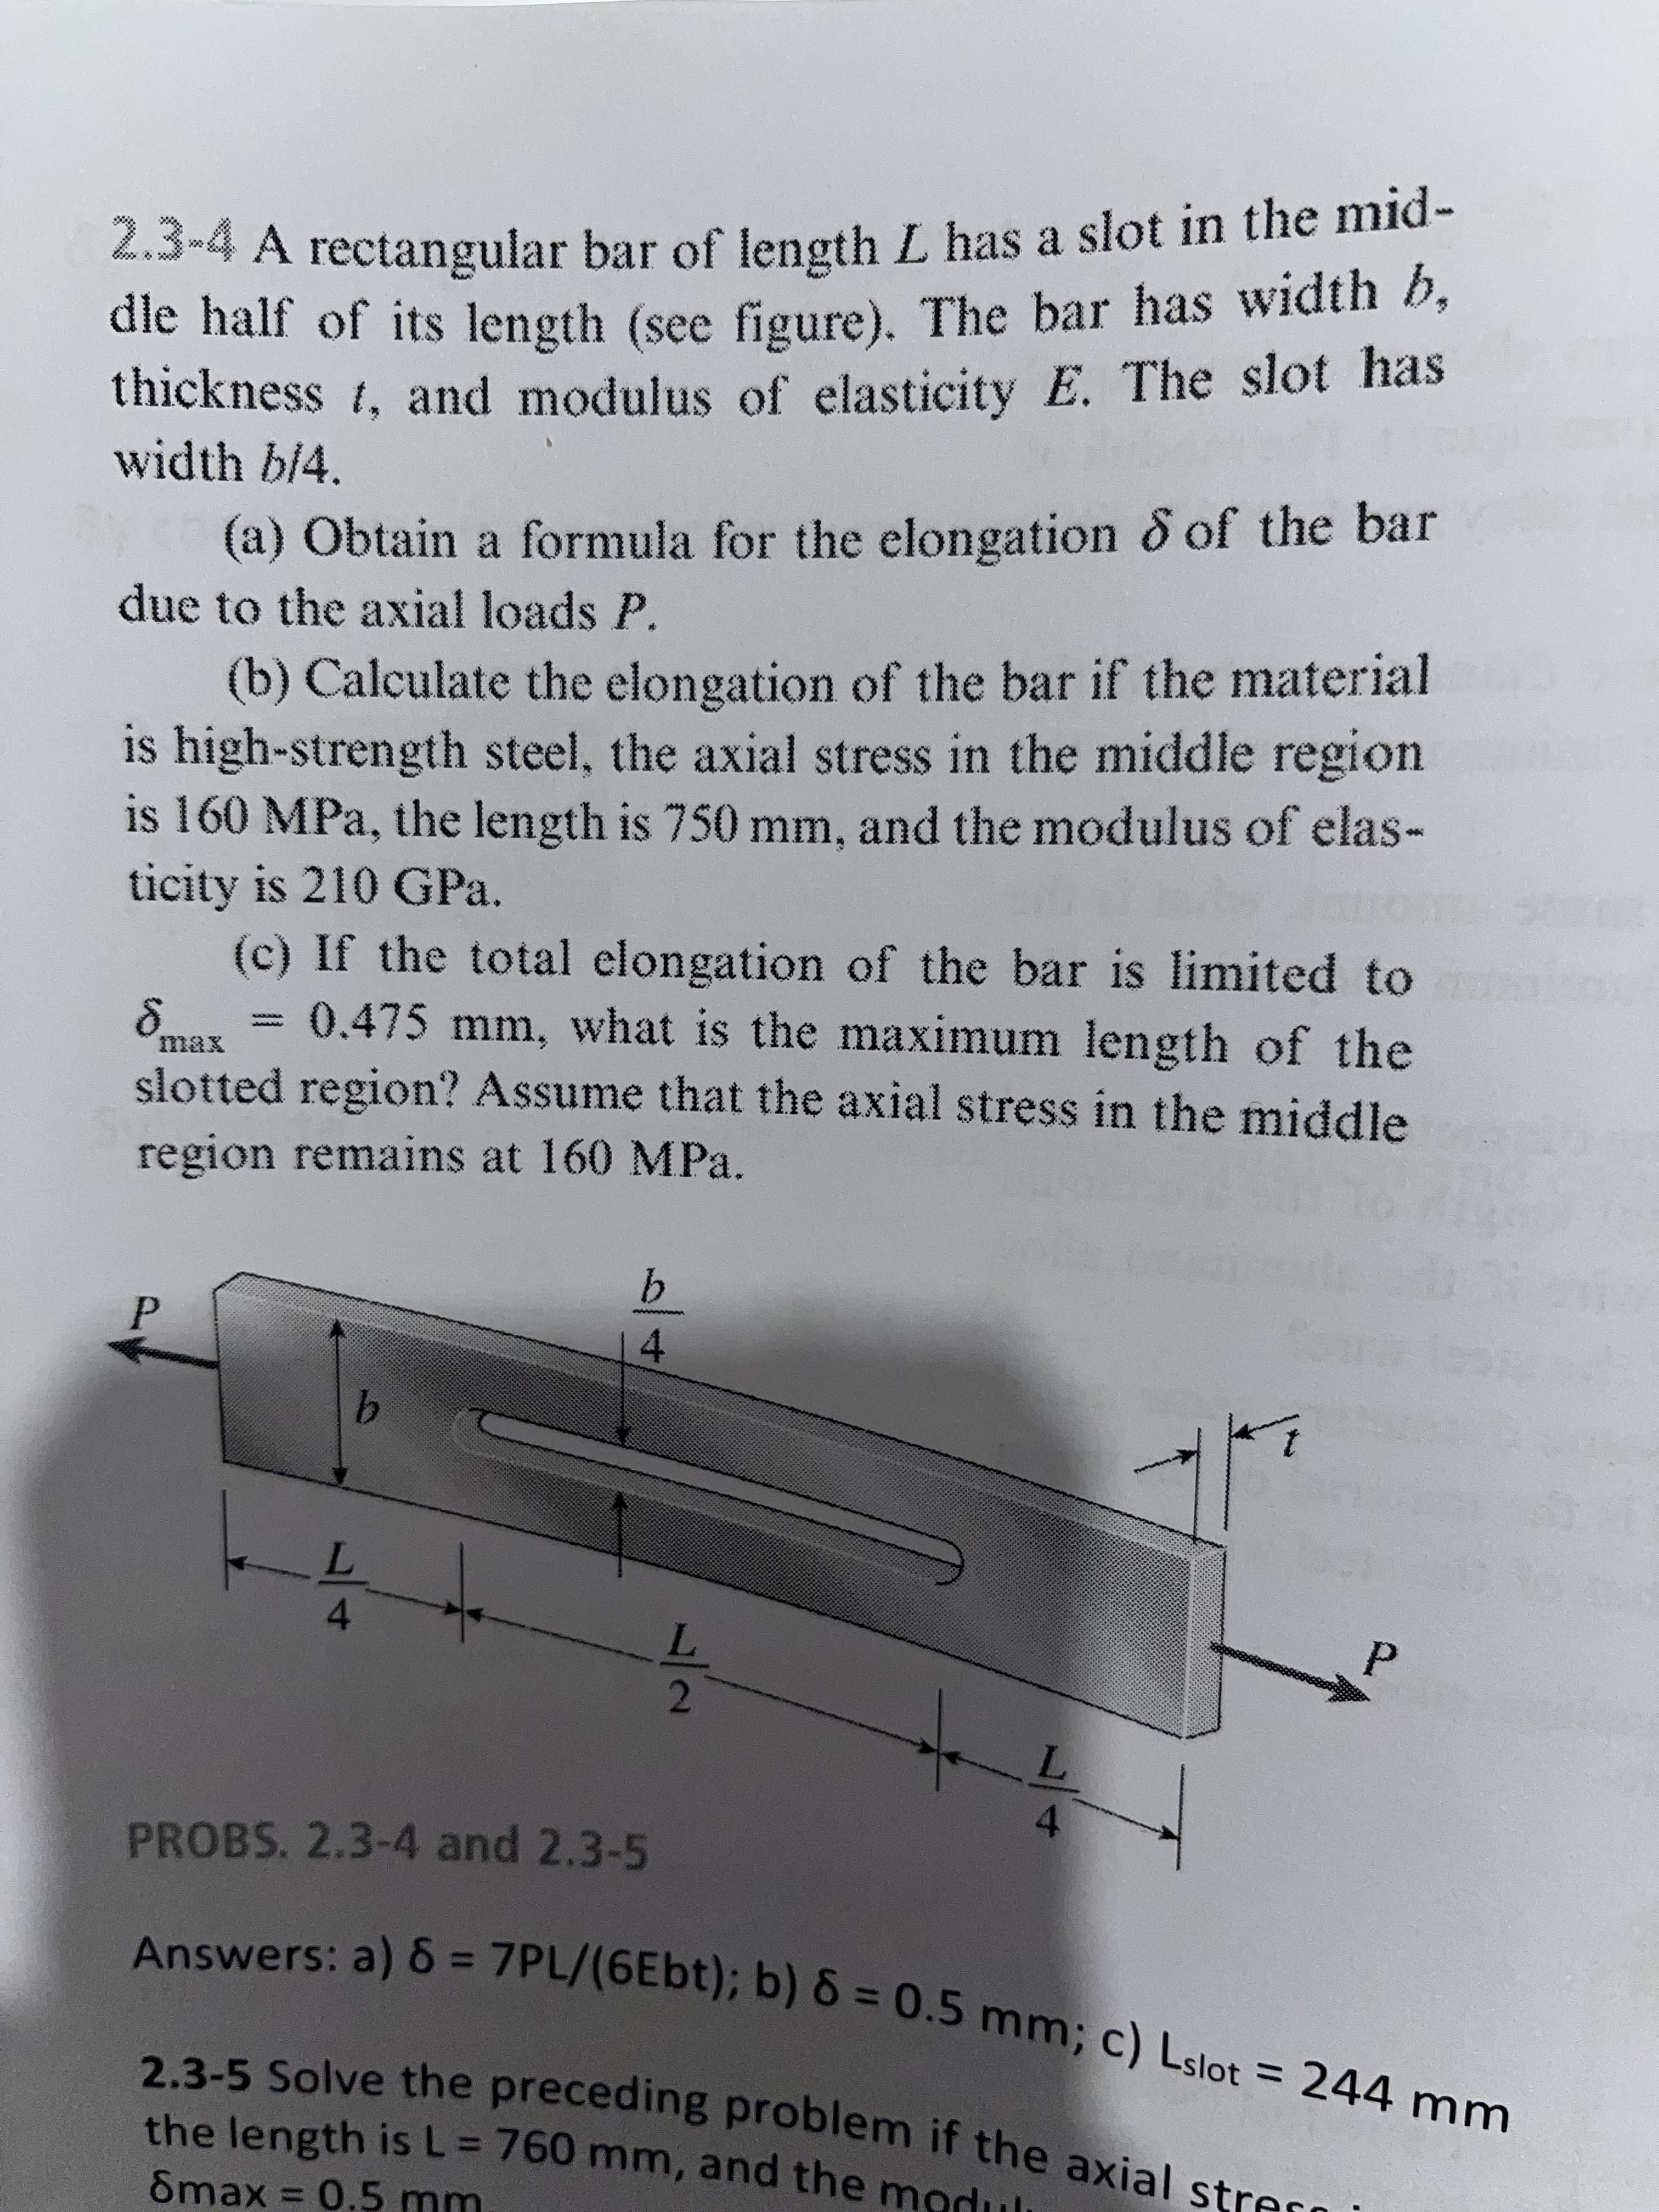 2.3-4 A rectangular bar of length L has a slot in the mid-
dle half of its length (see figure). The bar has width b,
thickness, and modulus of elasticity E. The slot has
width b/4.
(a) Obtain a formula for the elongation & of the bar
due to the axial loads P.
(b) Calculate the elongation of the bar if the material
is high-strength steel, the axial stress in the middle region
is 160 MPa, the length is 750 mm, and the modulus of elas-
ticity is 210 GPa.
(c) If the total elongation of the bar is limited to
= 0.475 mm, what is the maximum length of the
slotted region? Assume that the axial stress in the middle
region remains at 160 MPa.
8
b
P
4
Je
b
-4
P
4
L
PROBS. 2.3-4 and 2.3-5
Answers: a) 8 = 7PL/(6Ebt); b) 8 = 0.5 mm; c) Lslot = 244 mm
8max = 0.5 mm
the length is L = 760 mm, and the modul
2.3-5 Solve the preceding problem if the axial straro
L
14/1272